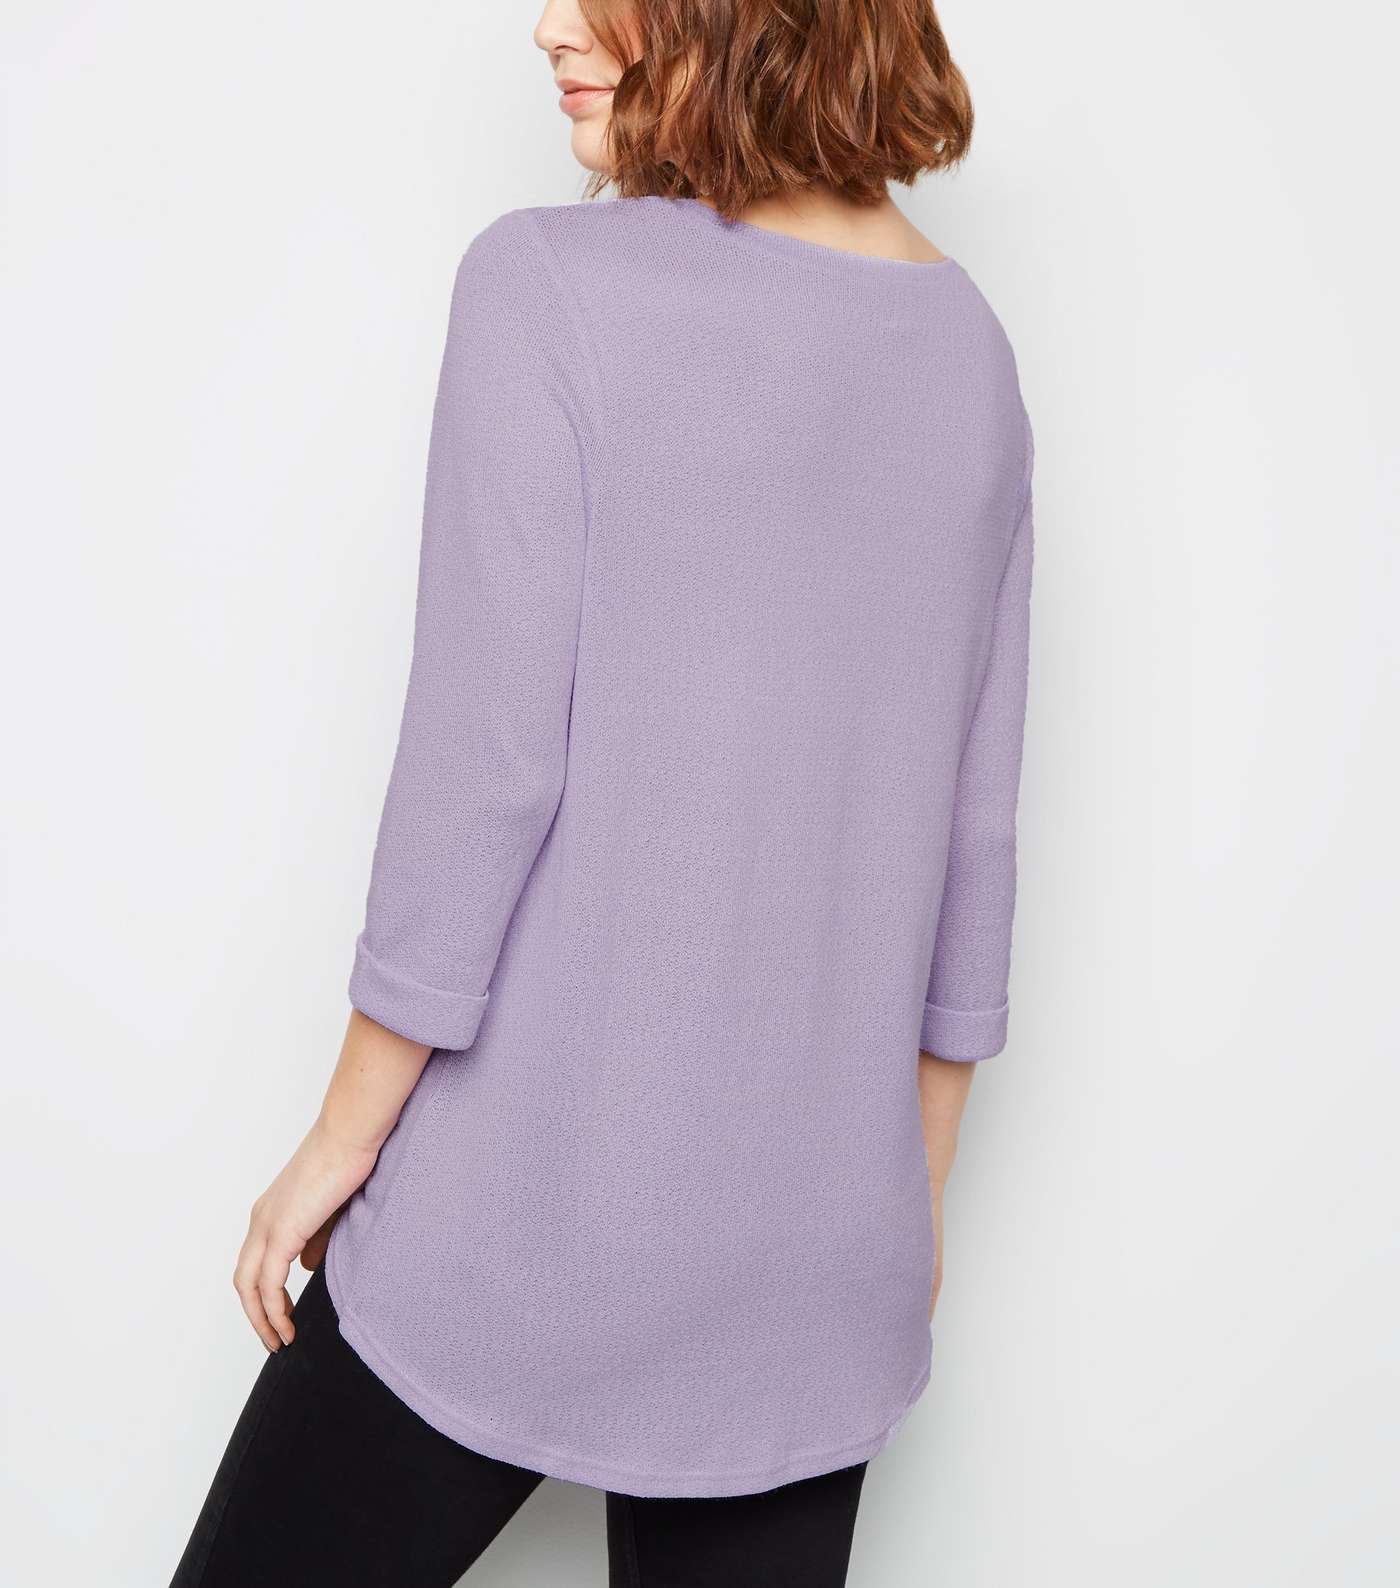 Lilac 3/4 Sleeve Fine Knit Top Image 3